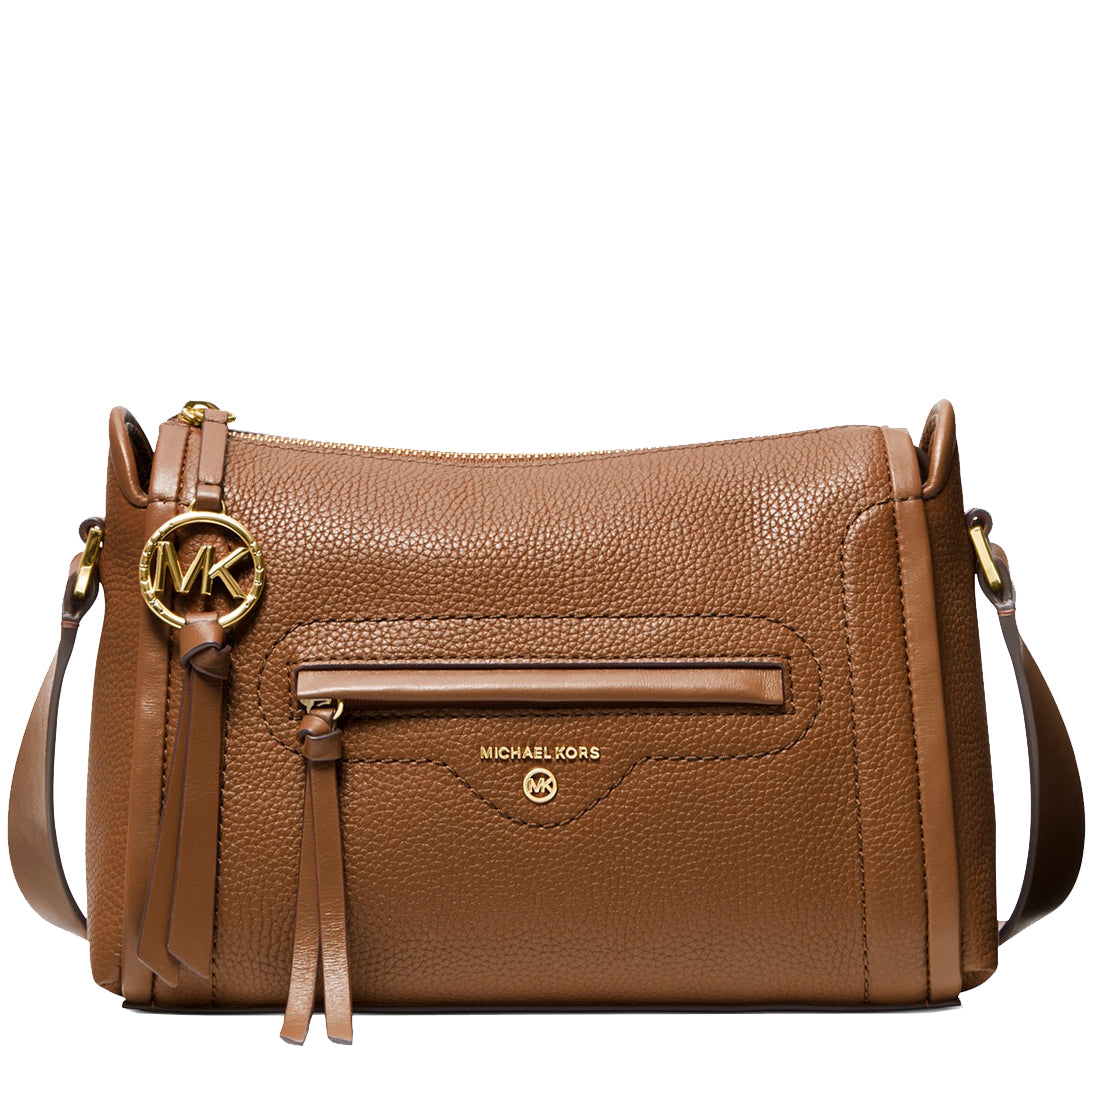 Michael Kors Carine Large Pebbled Leather Crossbody Bag in Luggage ...